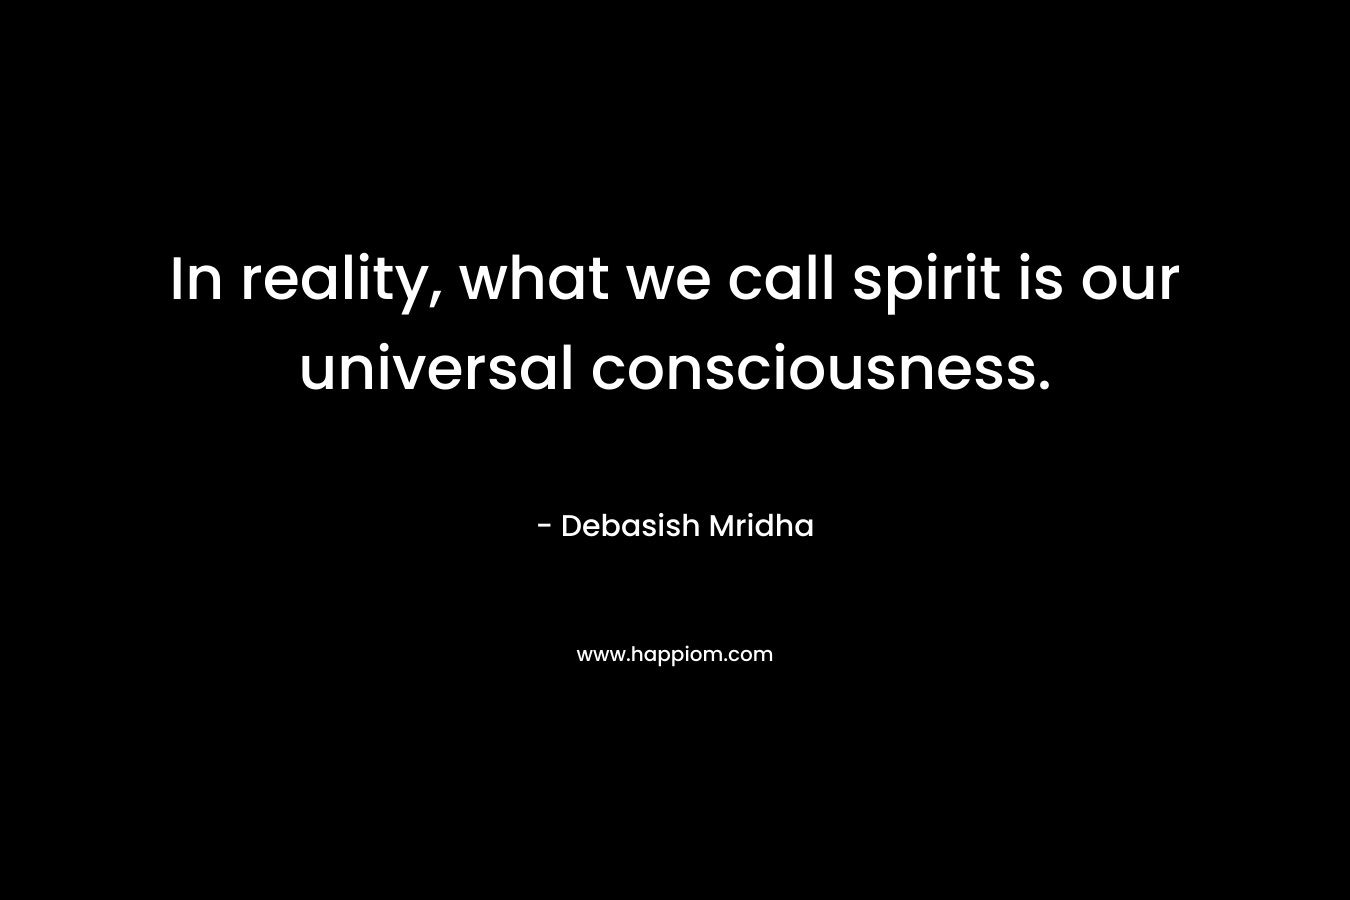 In reality, what we call spirit is our universal consciousness.